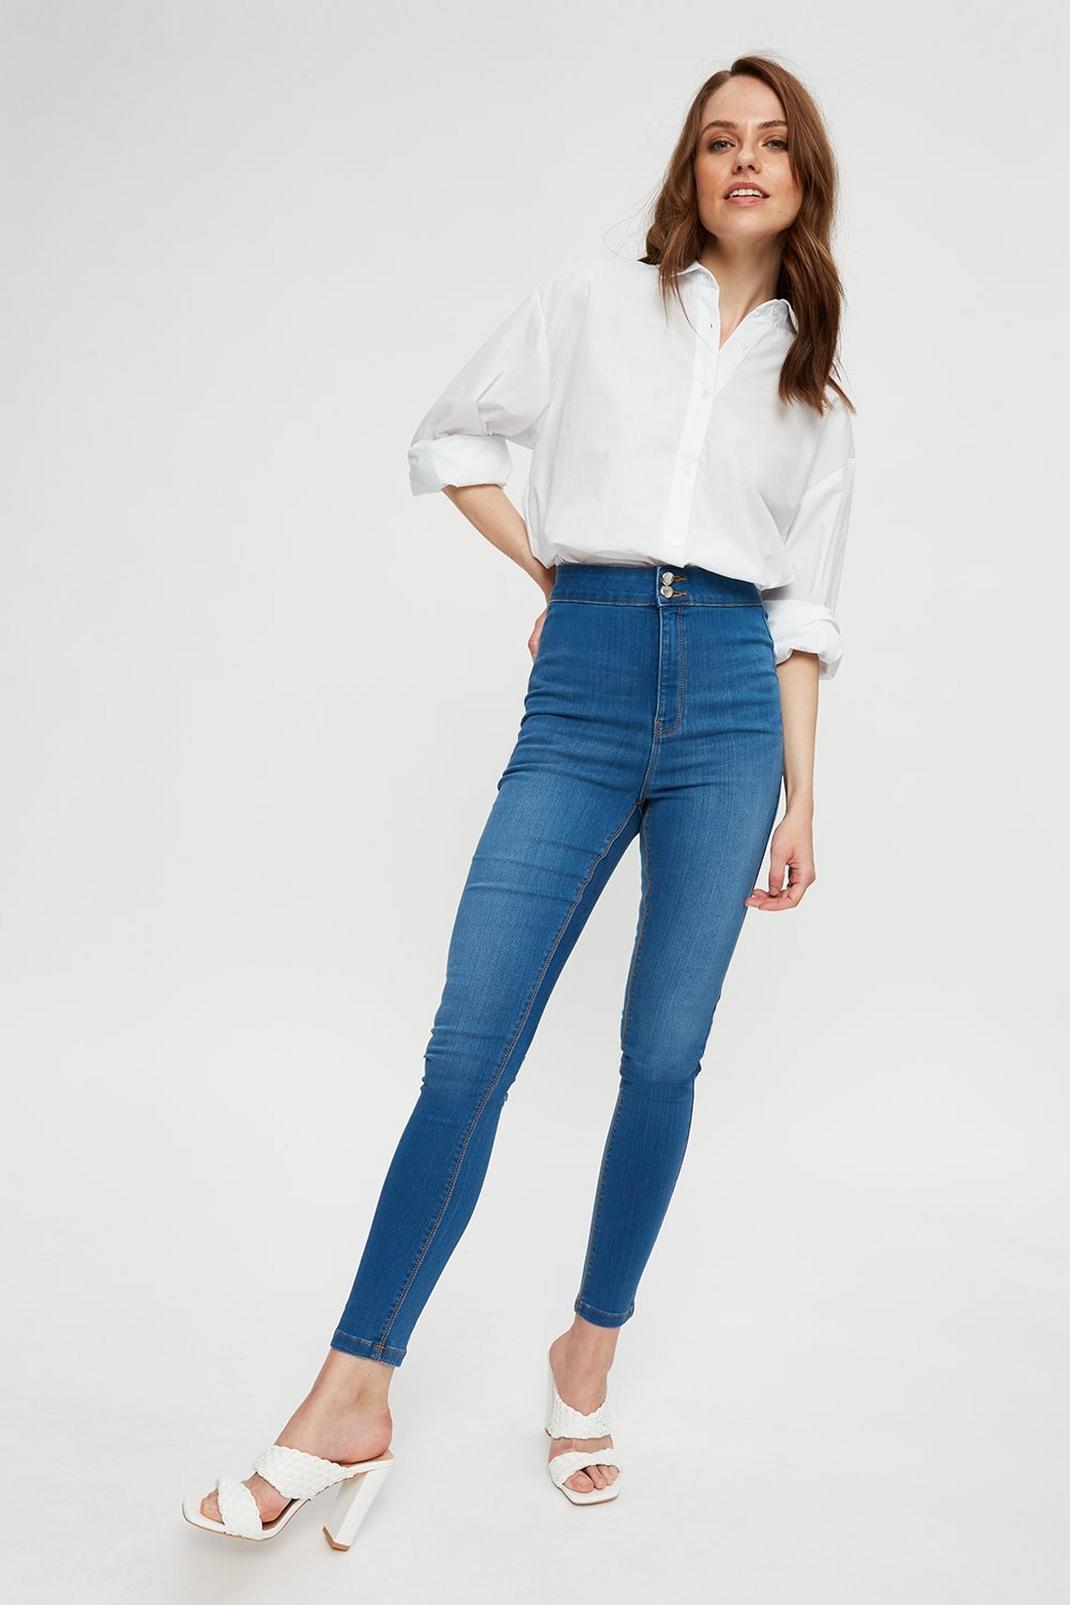 Print Nationwide Commercial Double Button Frankie Jeans | Dorothy Perkins EU